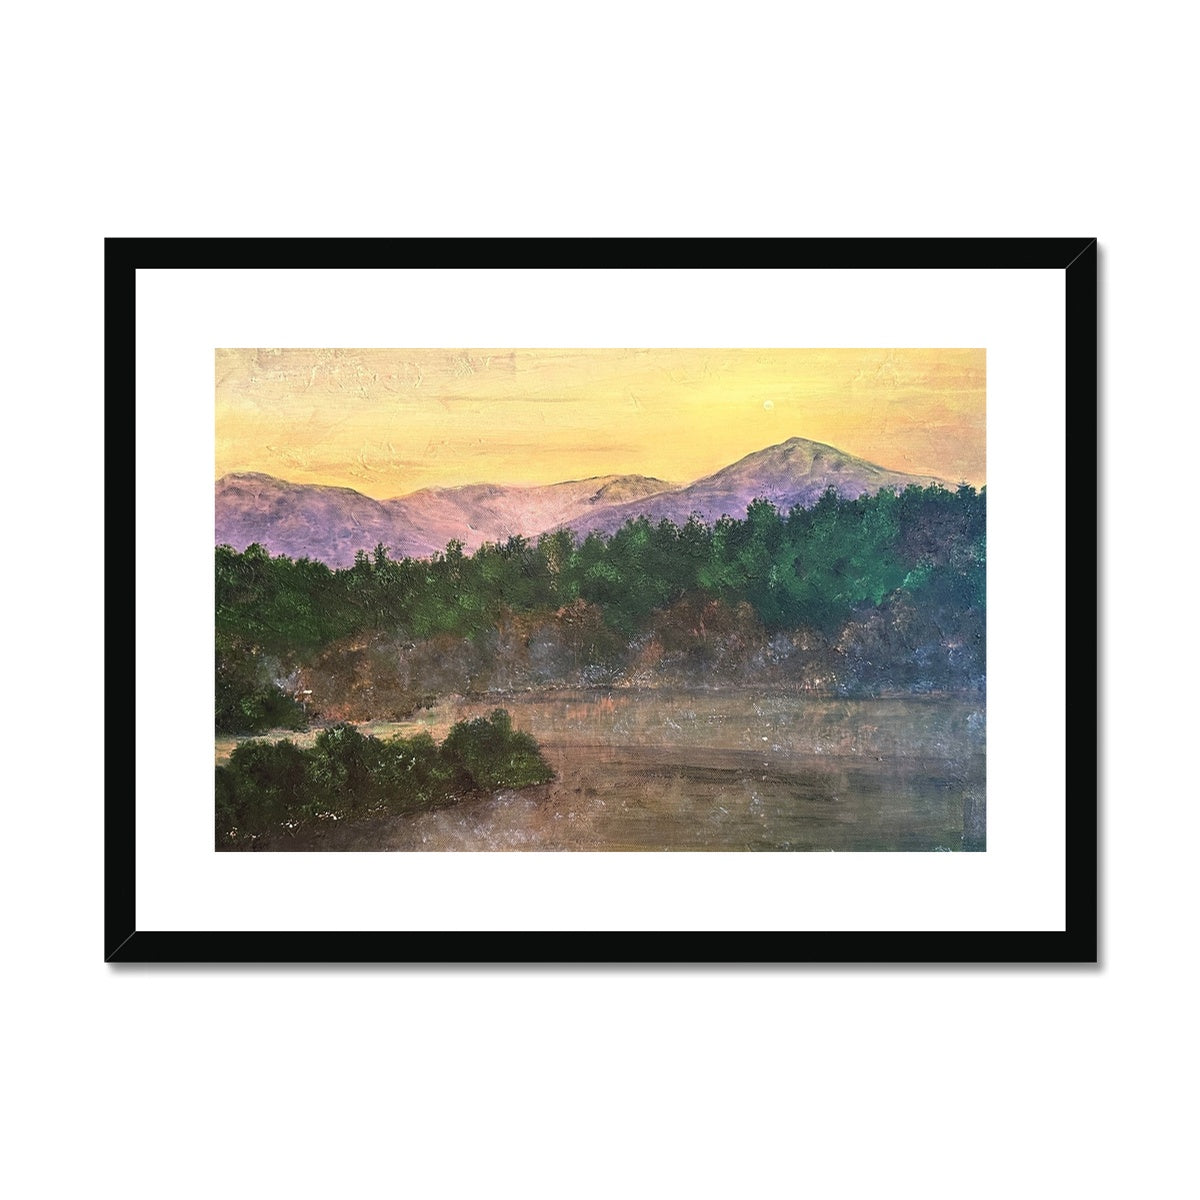 Ben Tee Invergarry Painting | Framed & Mounted Prints From Scotland-Framed & Mounted Prints-Scottish Lochs & Mountains Art Gallery-A2 Landscape-Black Frame-Paintings, Prints, Homeware, Art Gifts From Scotland By Scottish Artist Kevin Hunter